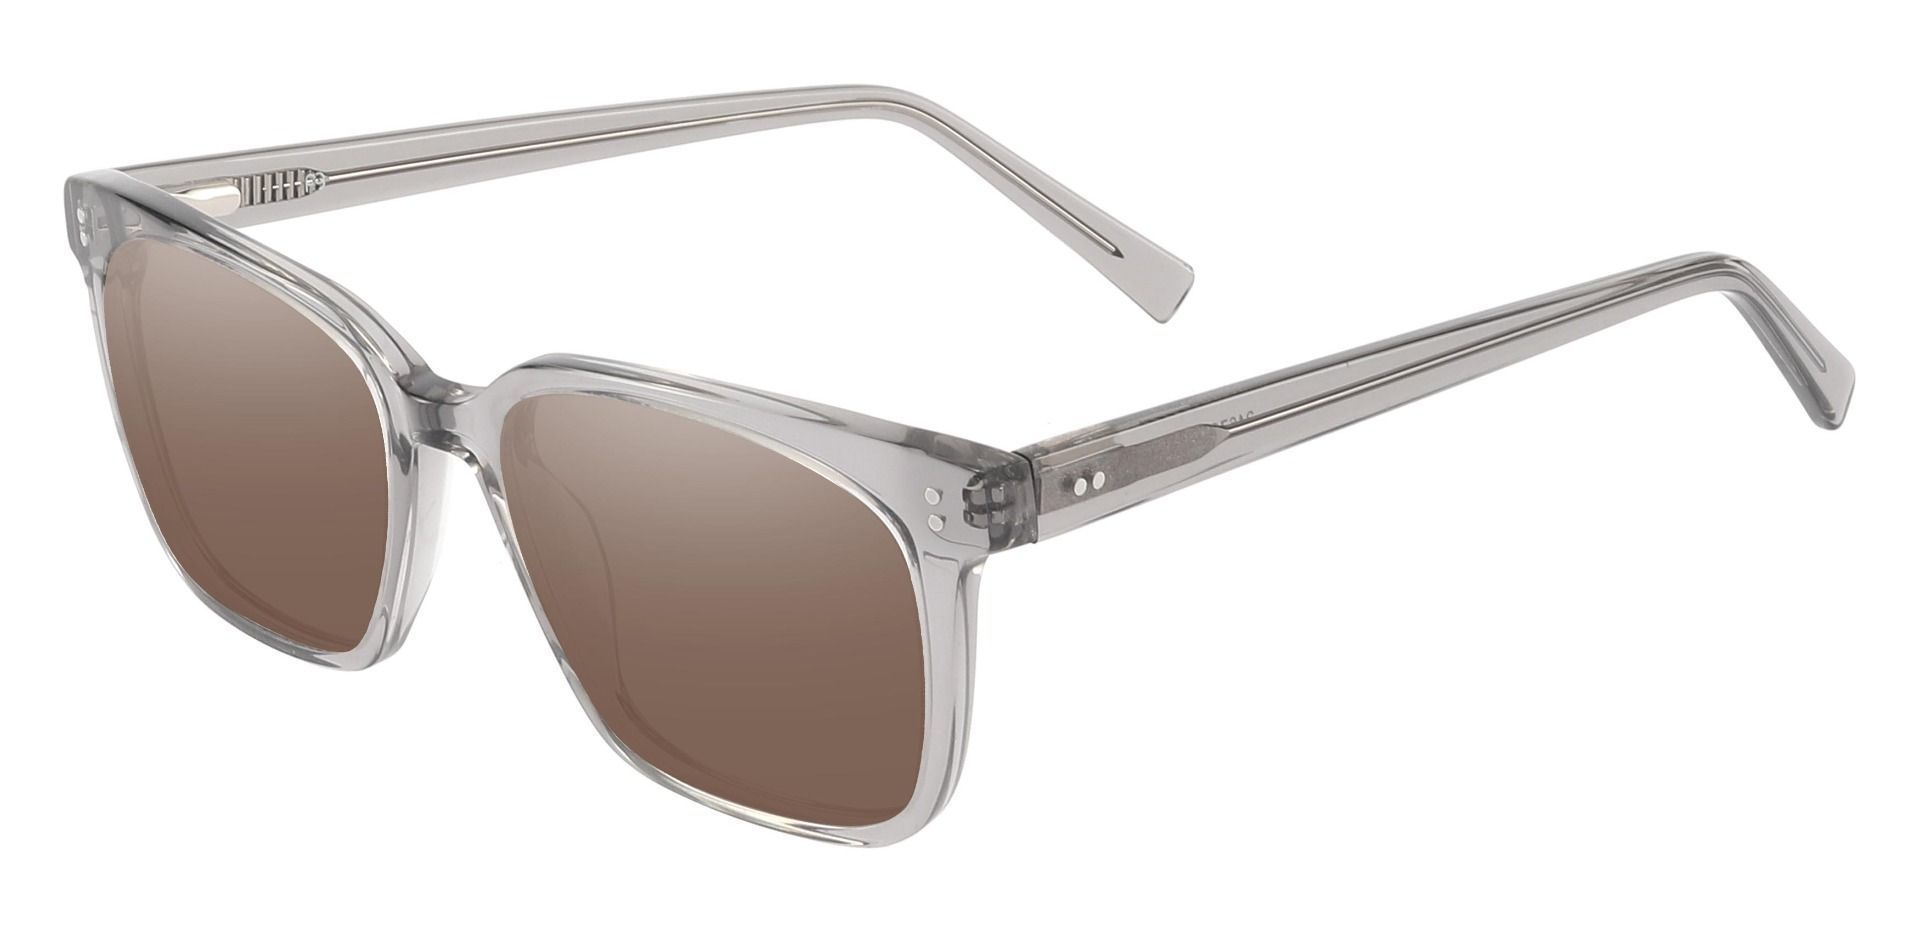 Apex Rectangle Non-Rx Sunglasses - Gray Frame With Brown Lenses